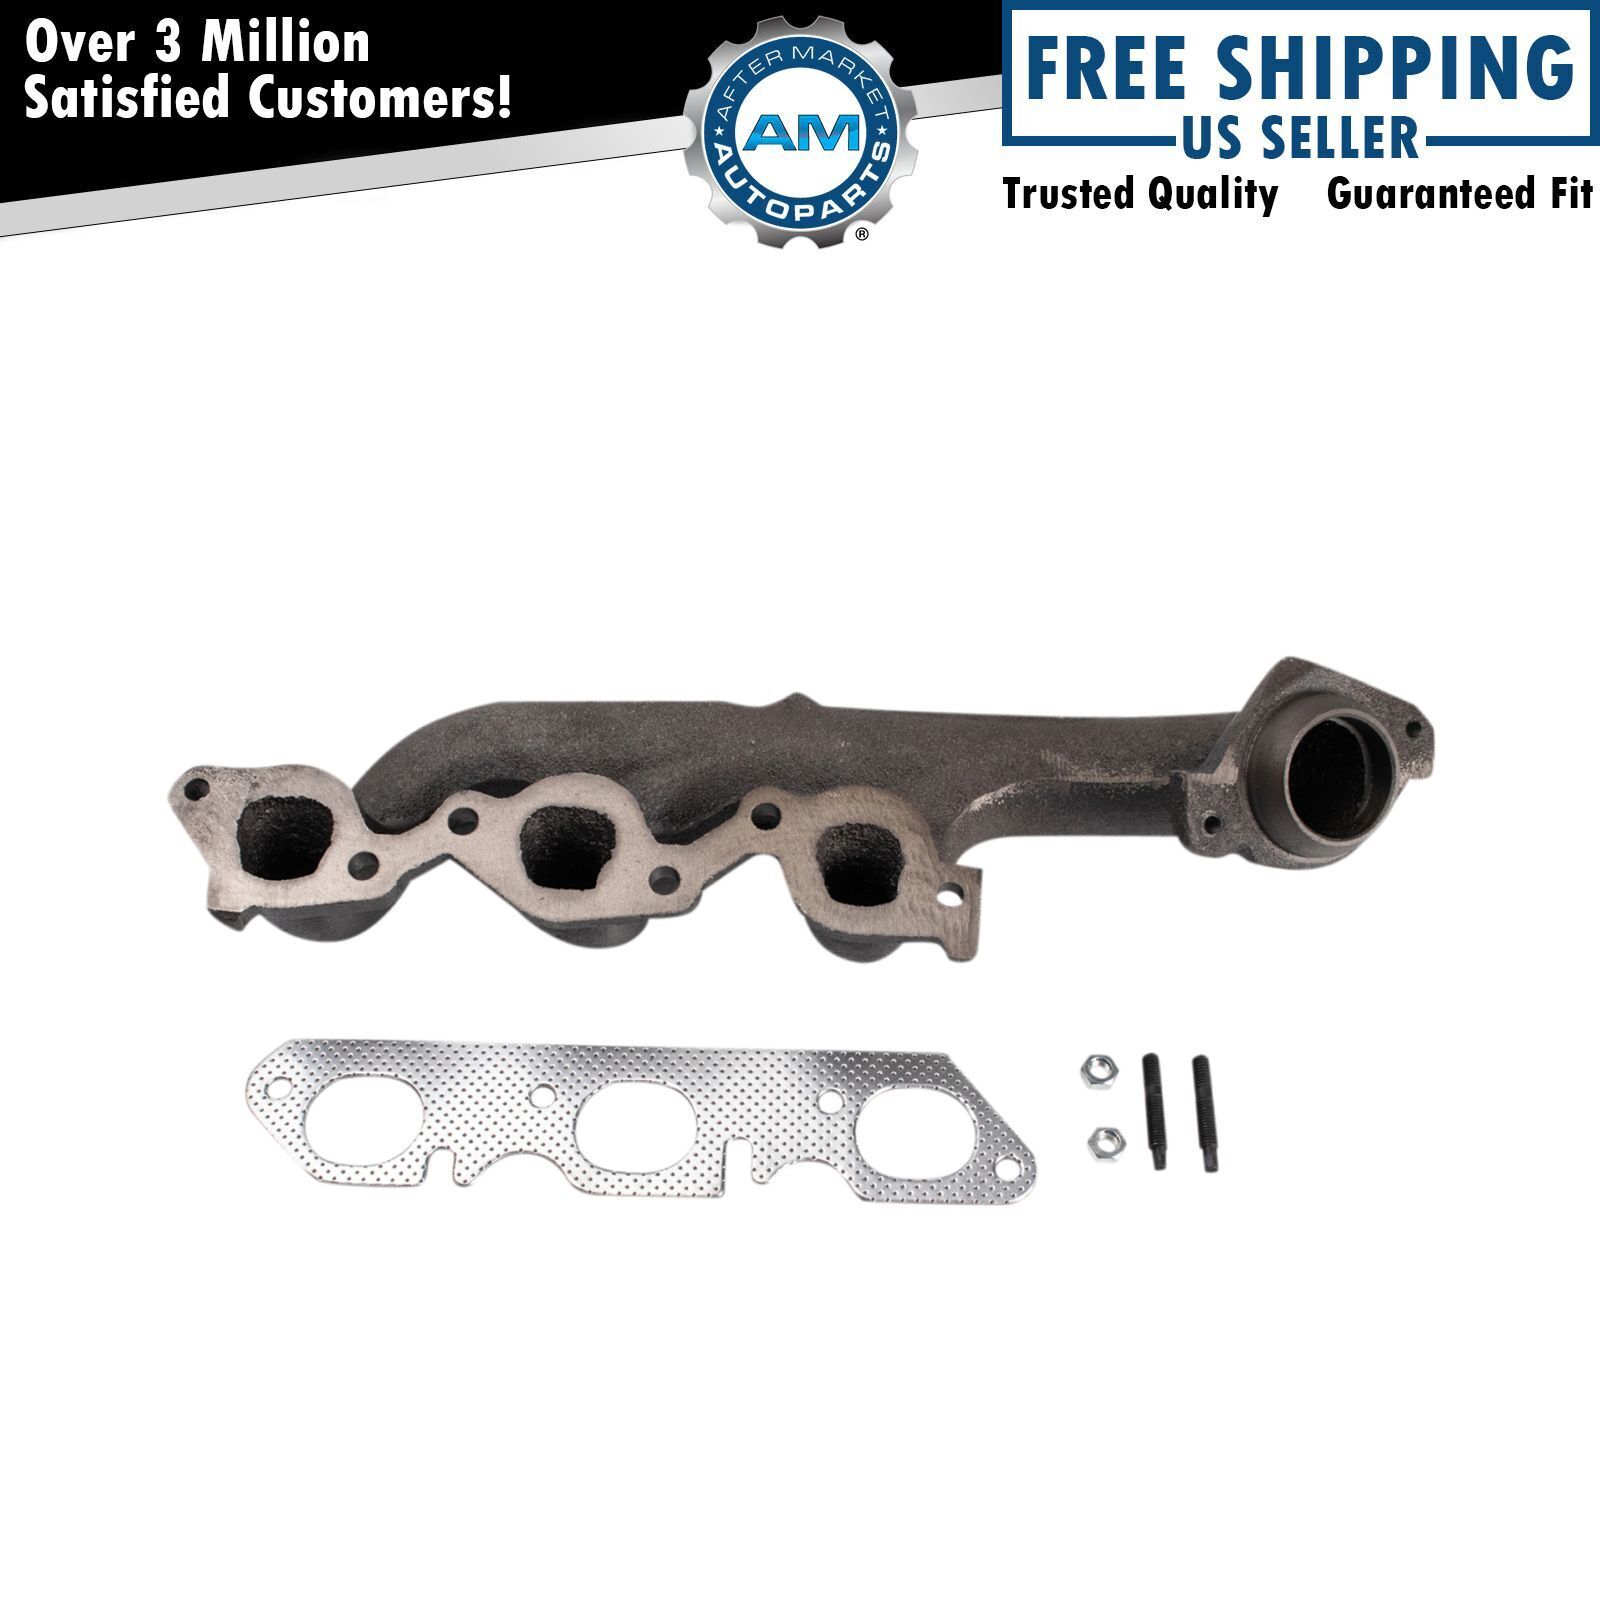 Front Exhaust Manifold for Buick LeSabre Regal Chevy Impala Lumina Olds 3.8L